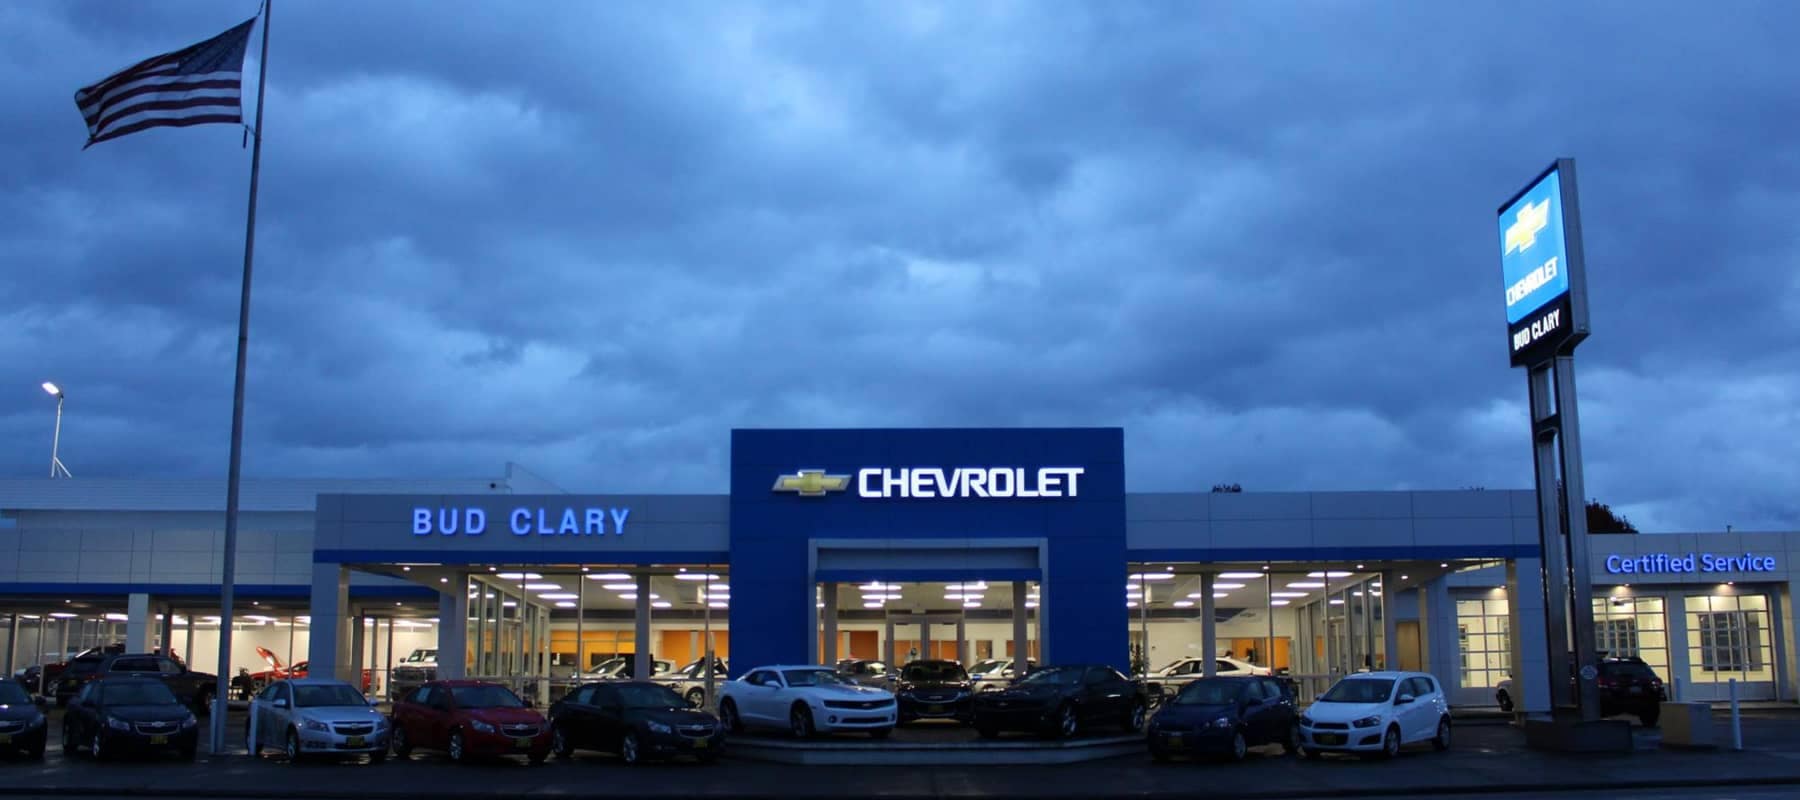 Bud Clary Chevrolet - Dealership exterior pictured at dusk